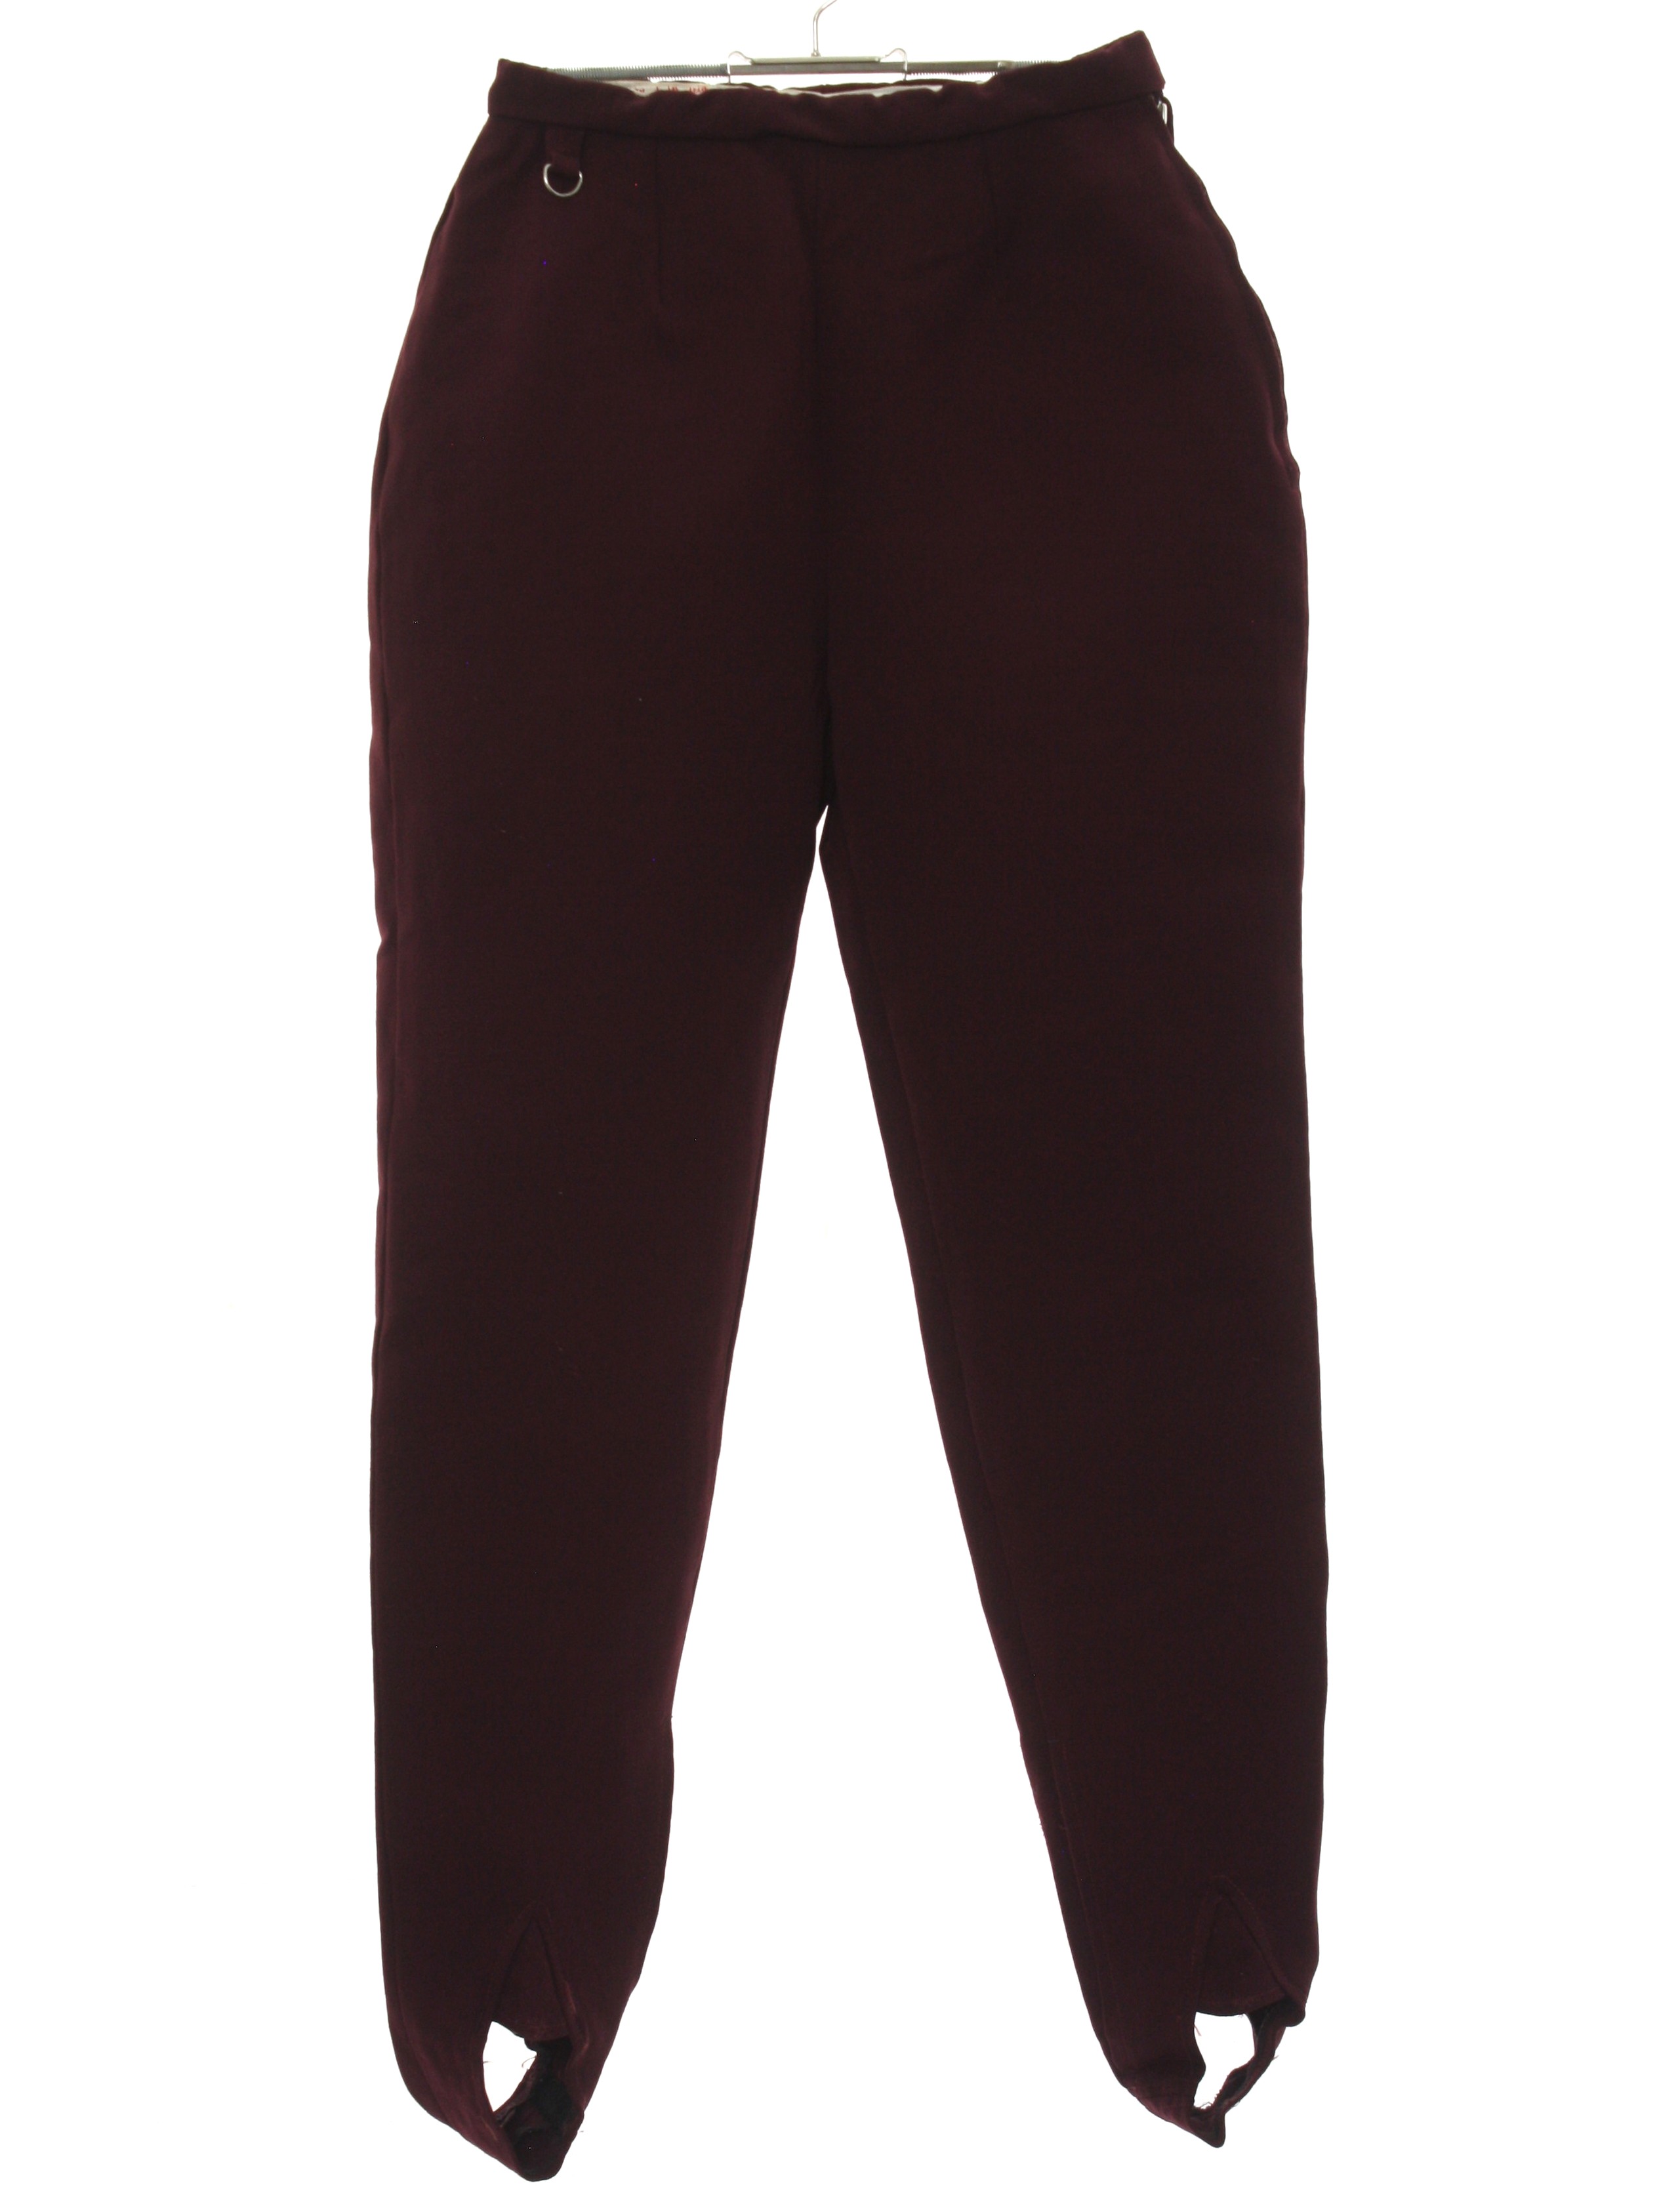 Vintage 1950's Pants: 50s -White Stag- Womens burgundy background